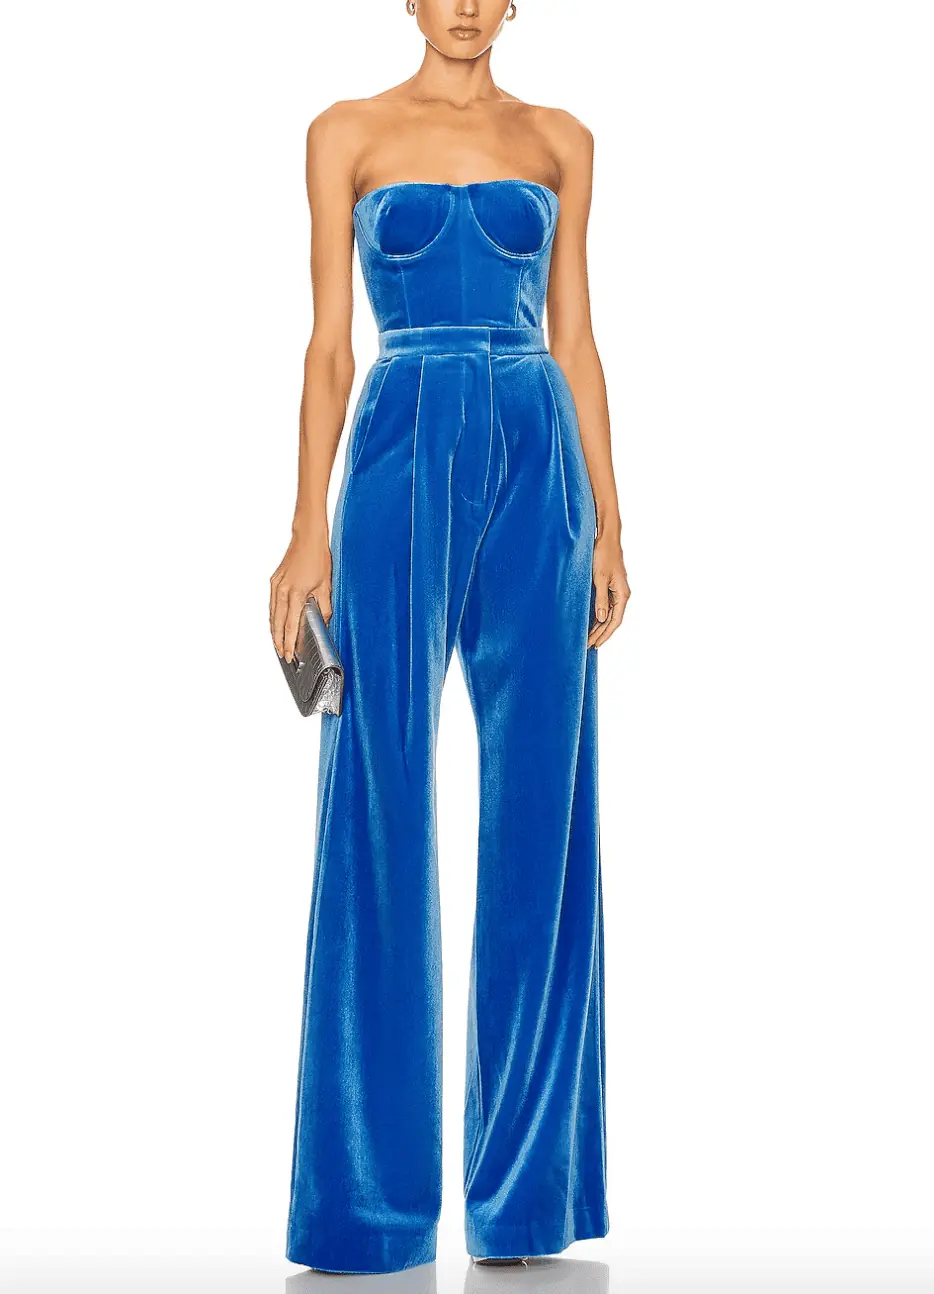 Sheree Whitfield's Blue Velvet Bustier Top and Pants